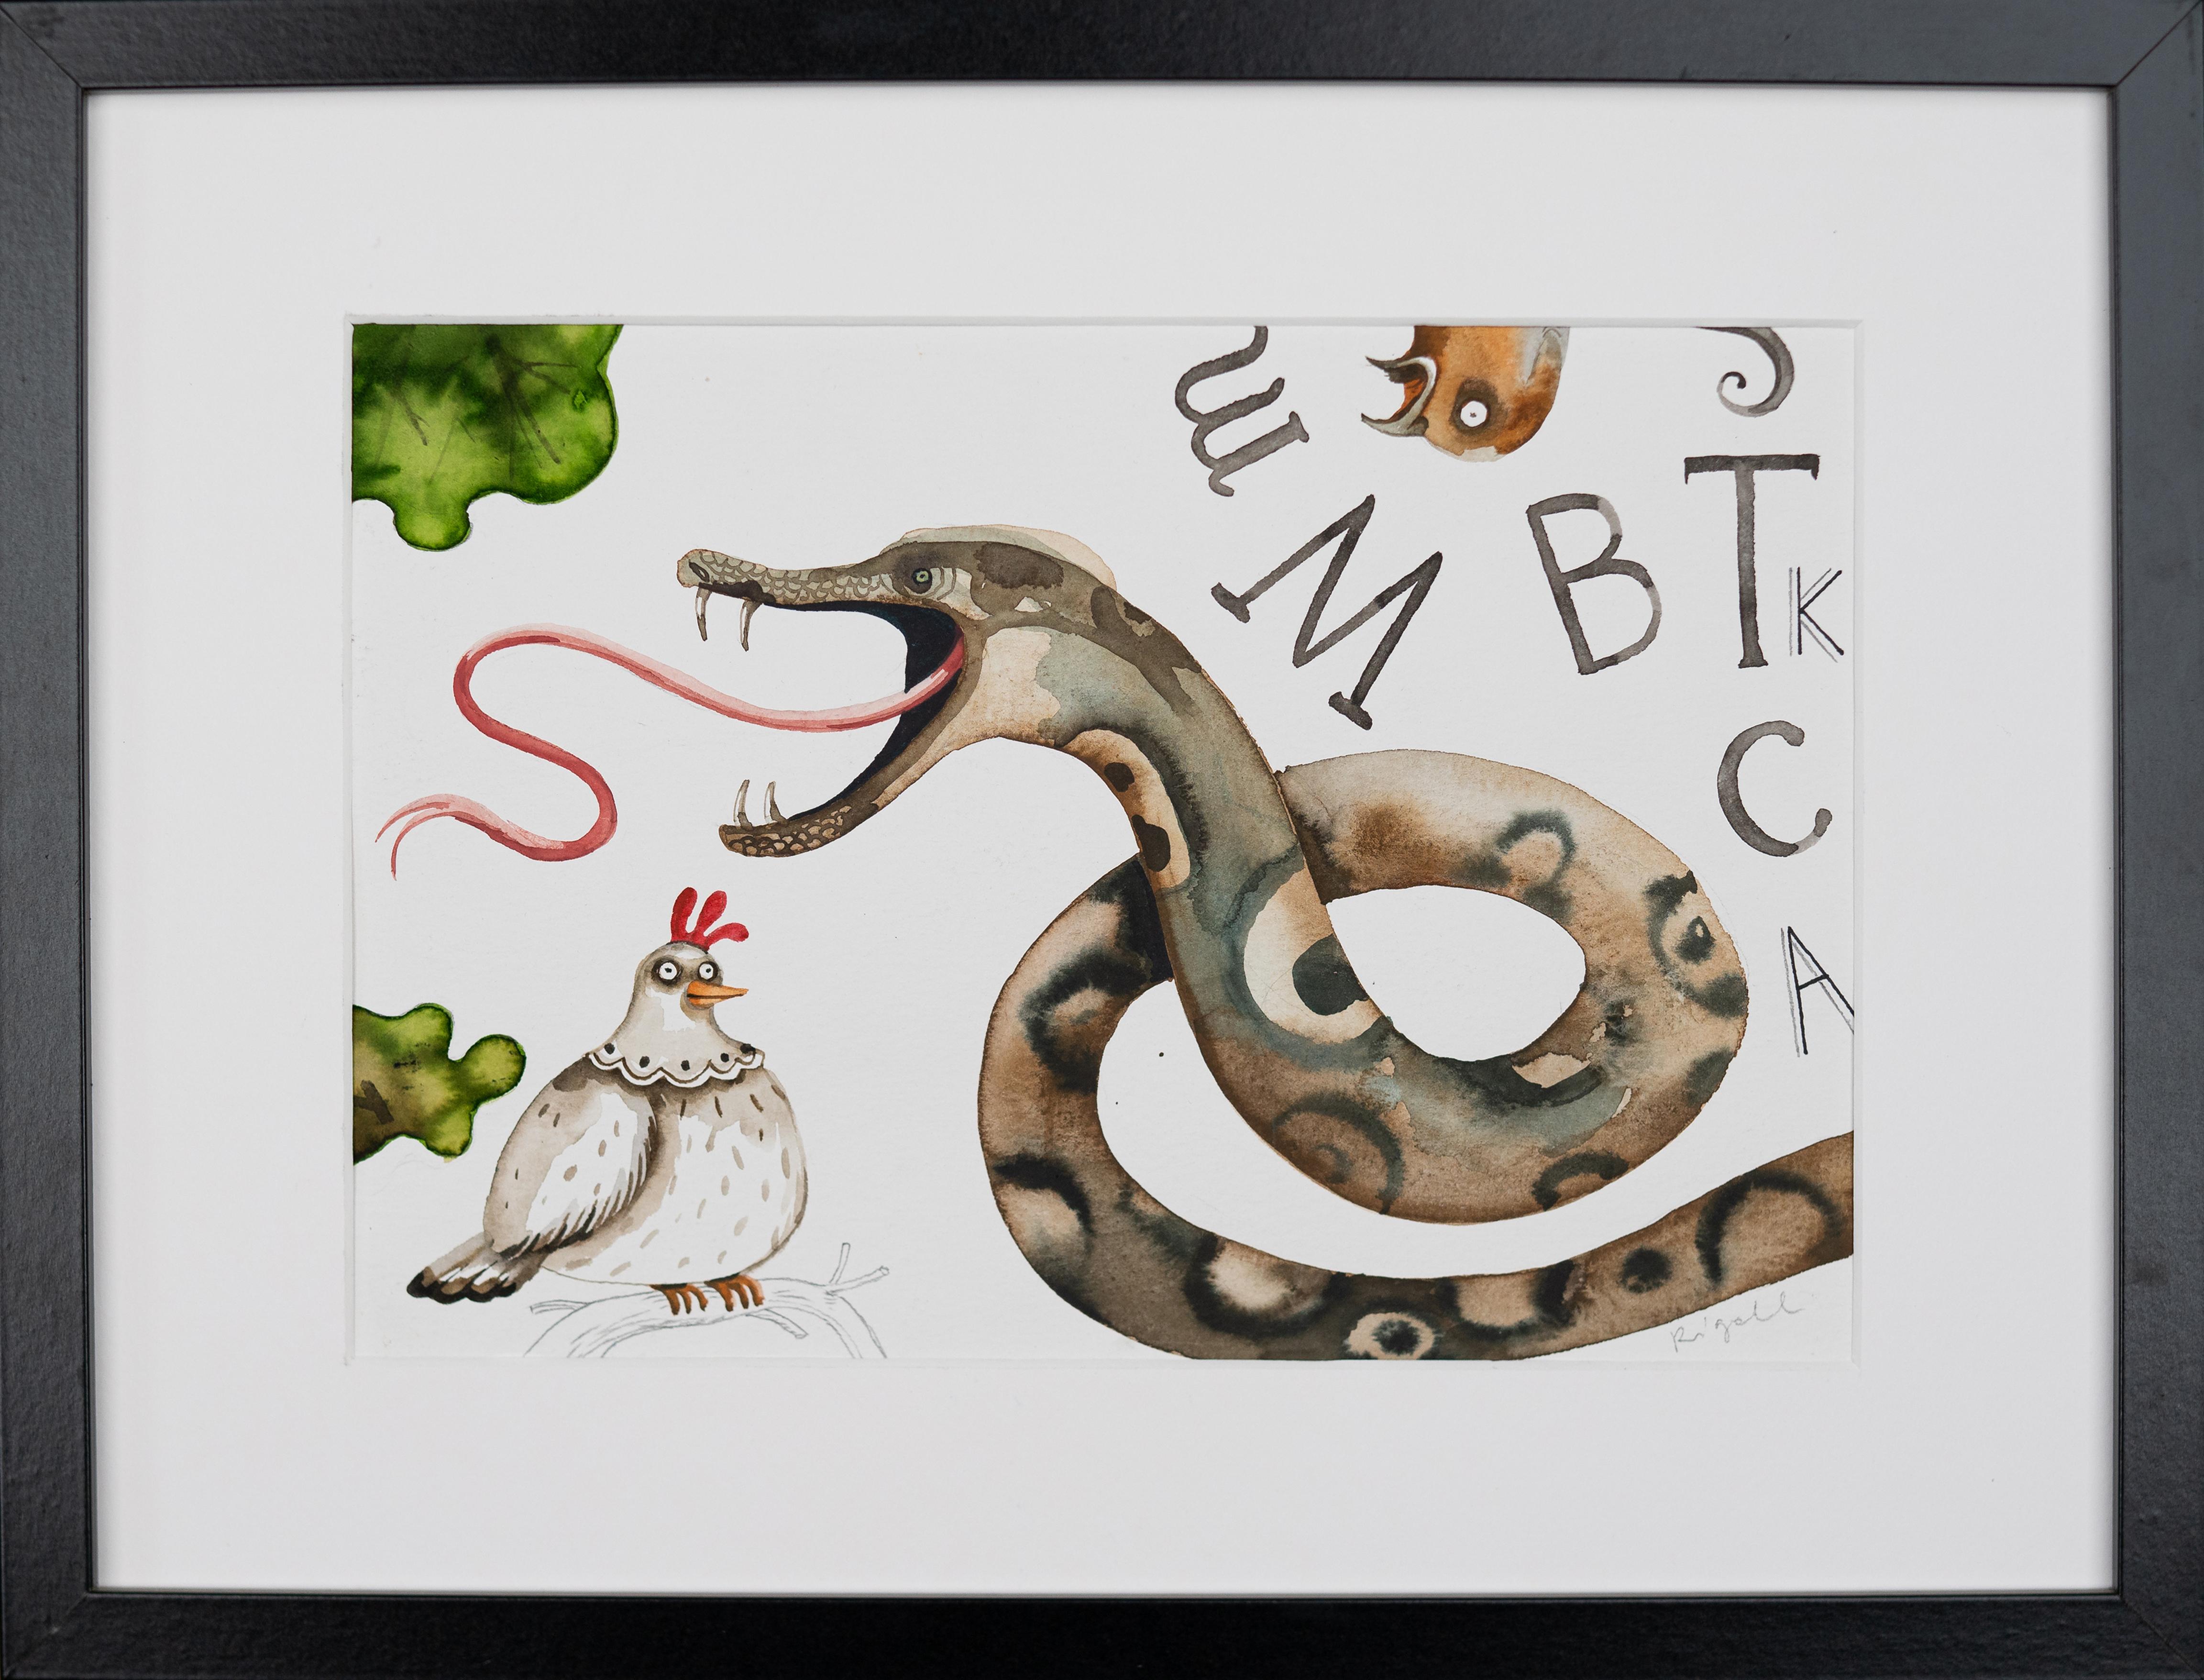 Grazyna Rigall Animal Painting - The Snake - Original Children Book Illustration Painting for "The man as he is"